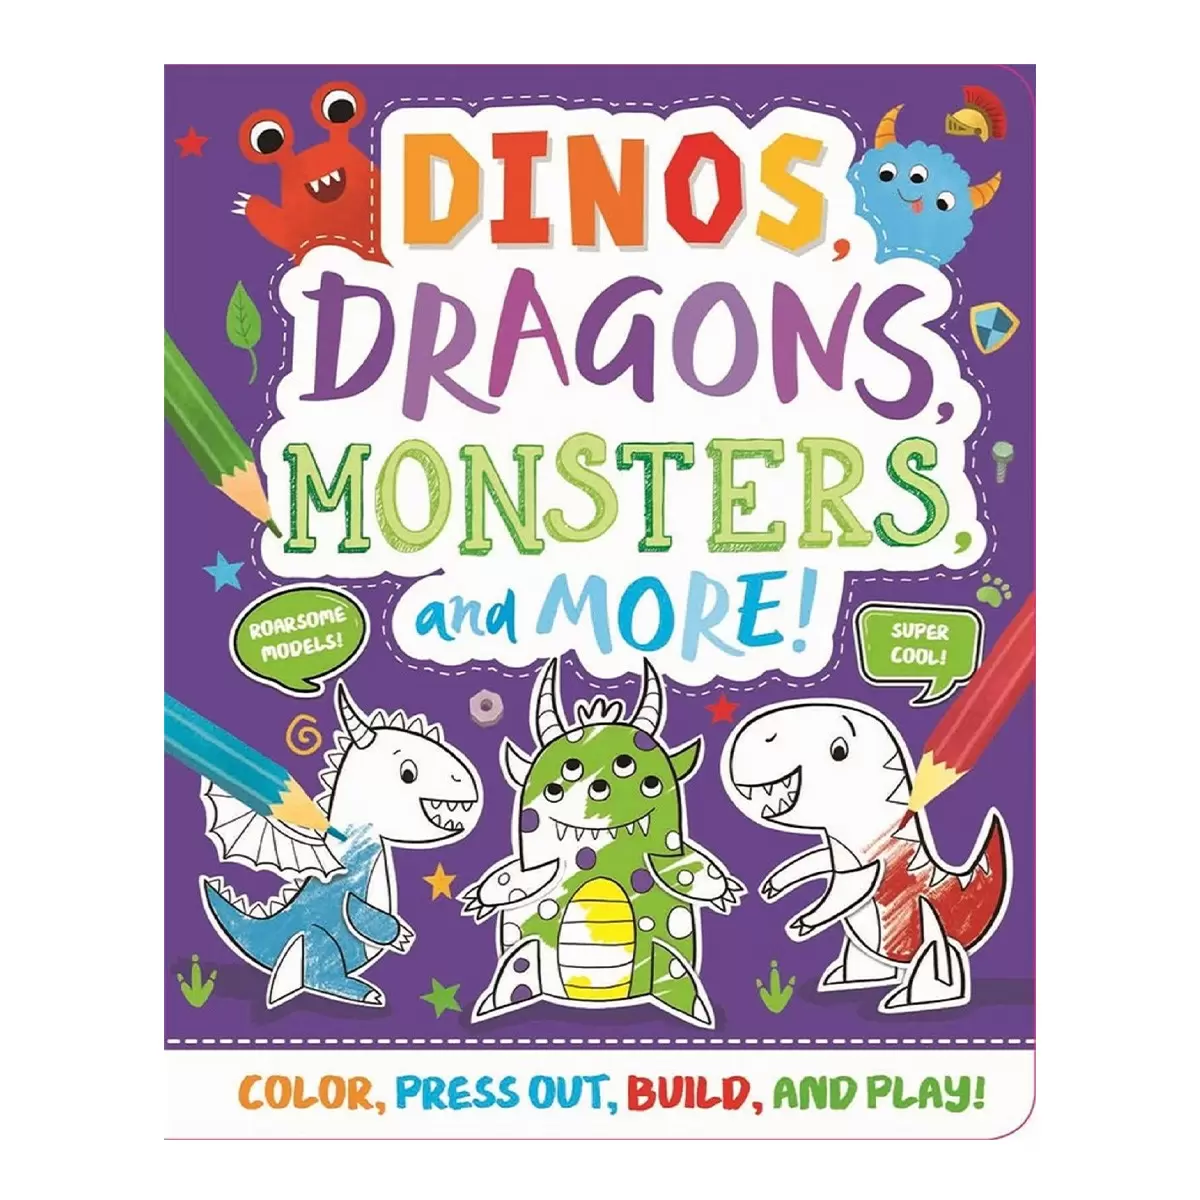 Press-Out and Build Model Book 外文遊戲書 Dinos, Dragons, Monsters and More!